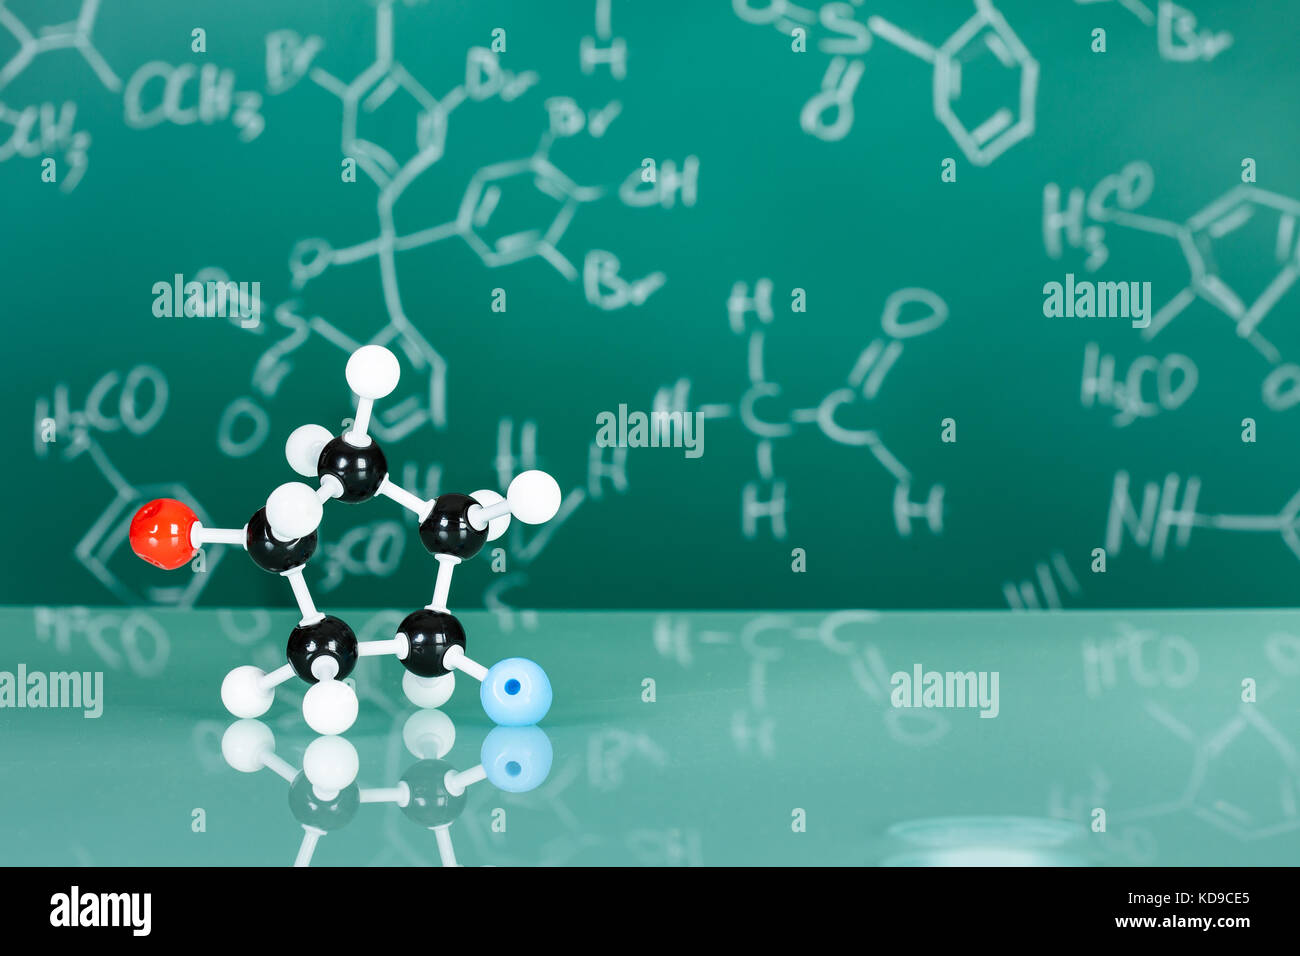 Model of molecular structure on green reflective background Stock Photo